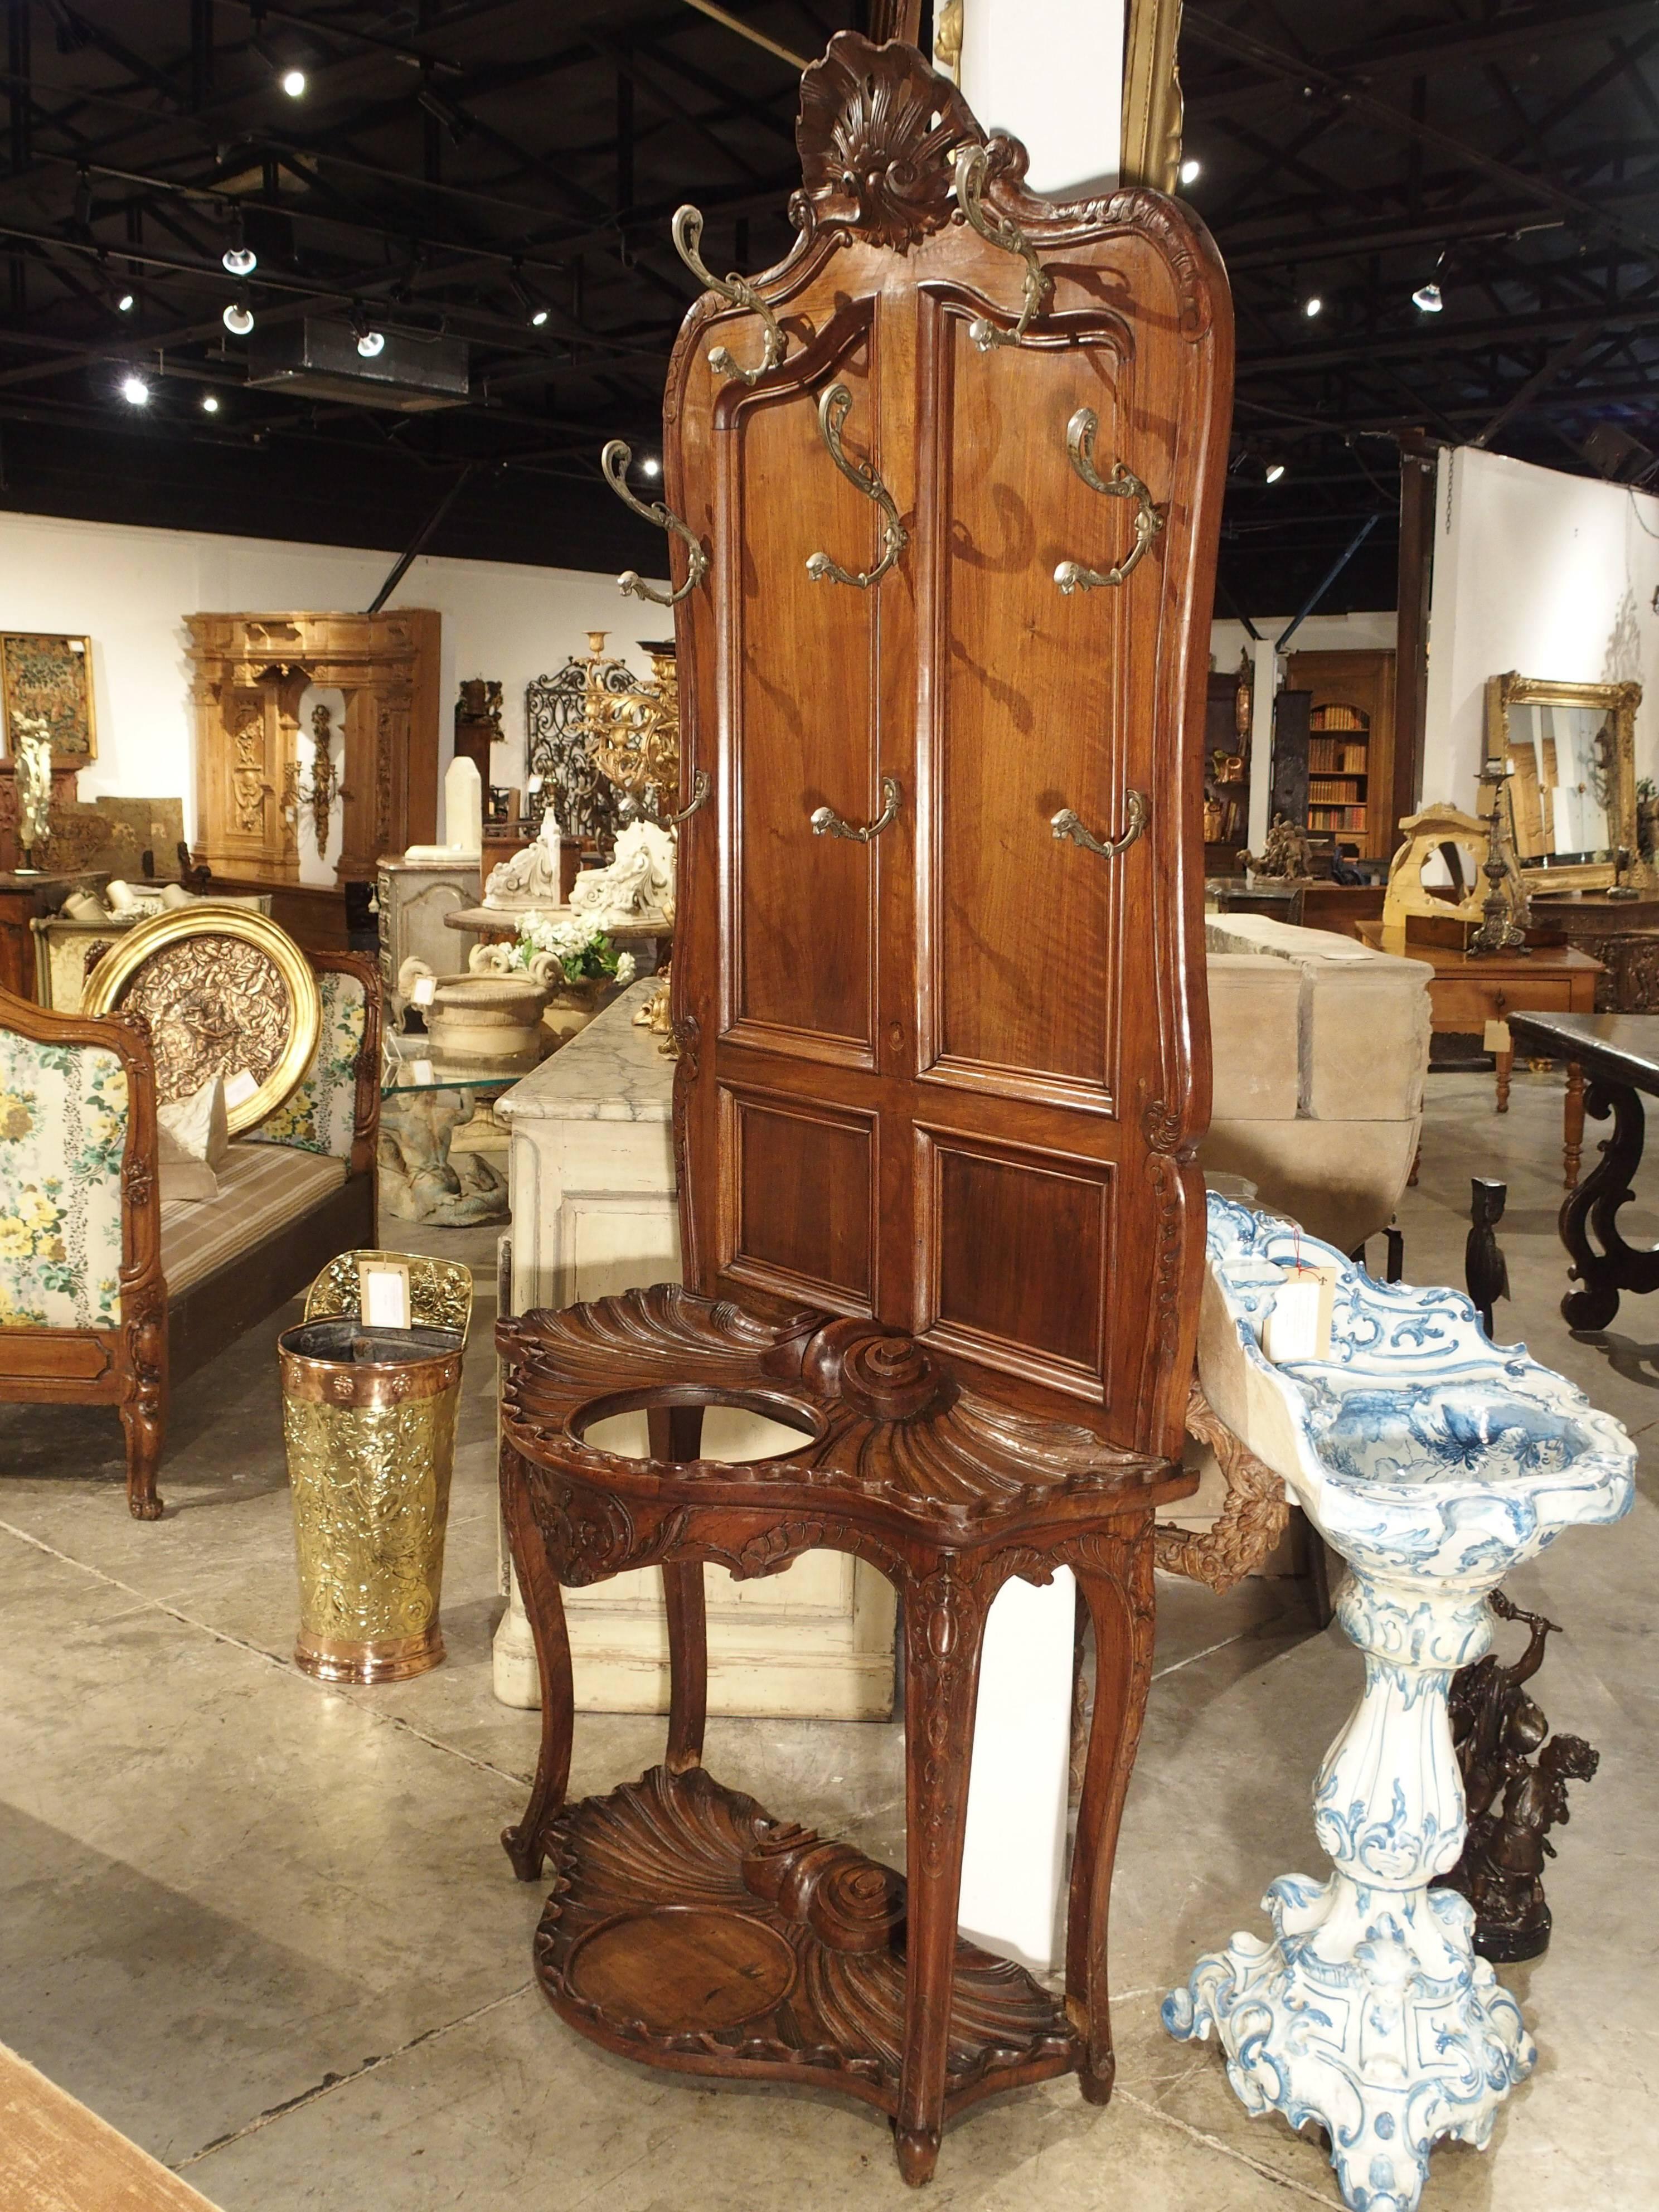 Carved Antique French Walnut Wood Hall Rack and Umbrella Stand, circa 1880